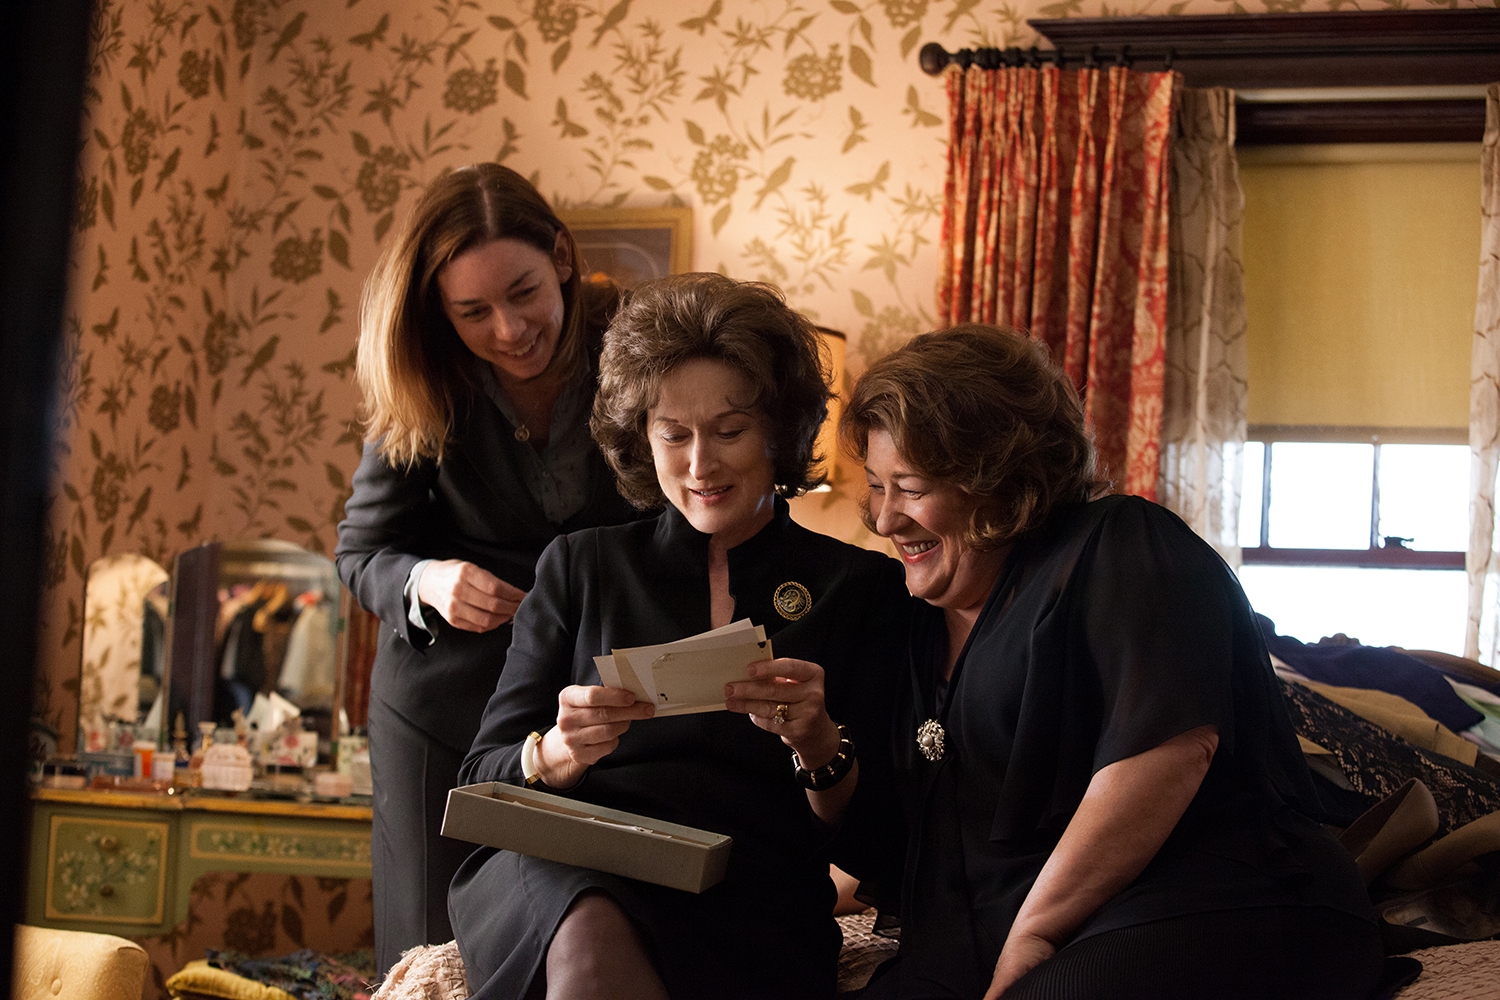 Julianne Nicholson, Meryl Streep, and Margo Martindale consult their family history in August: Osage County.